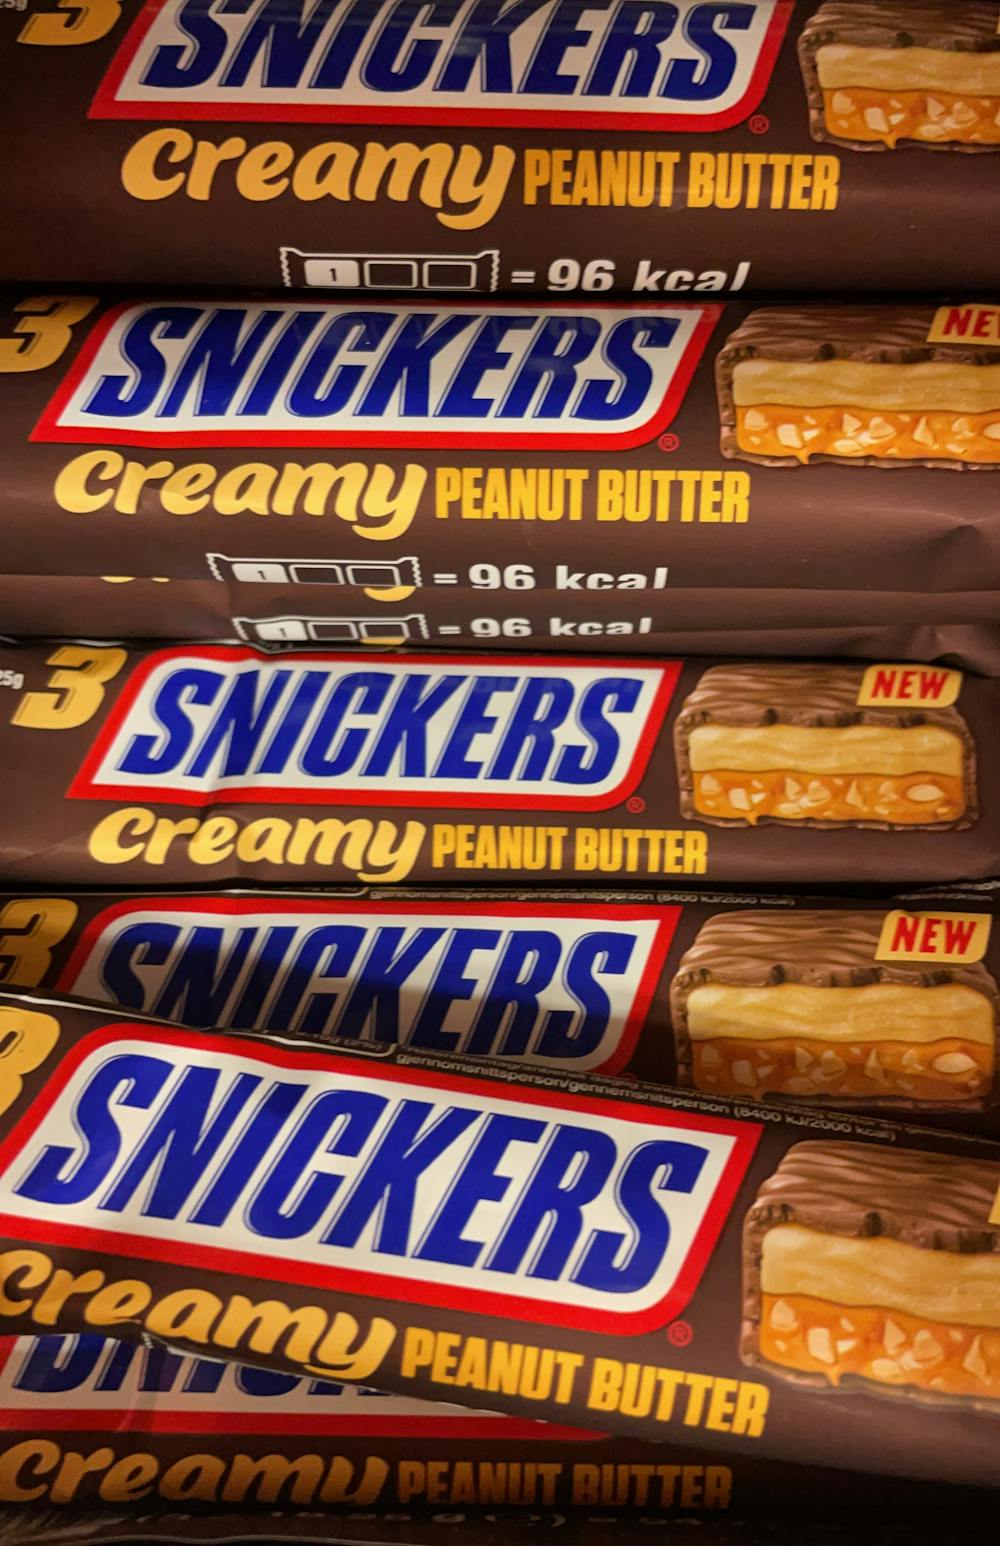 Creamy peanut butter, Snickers